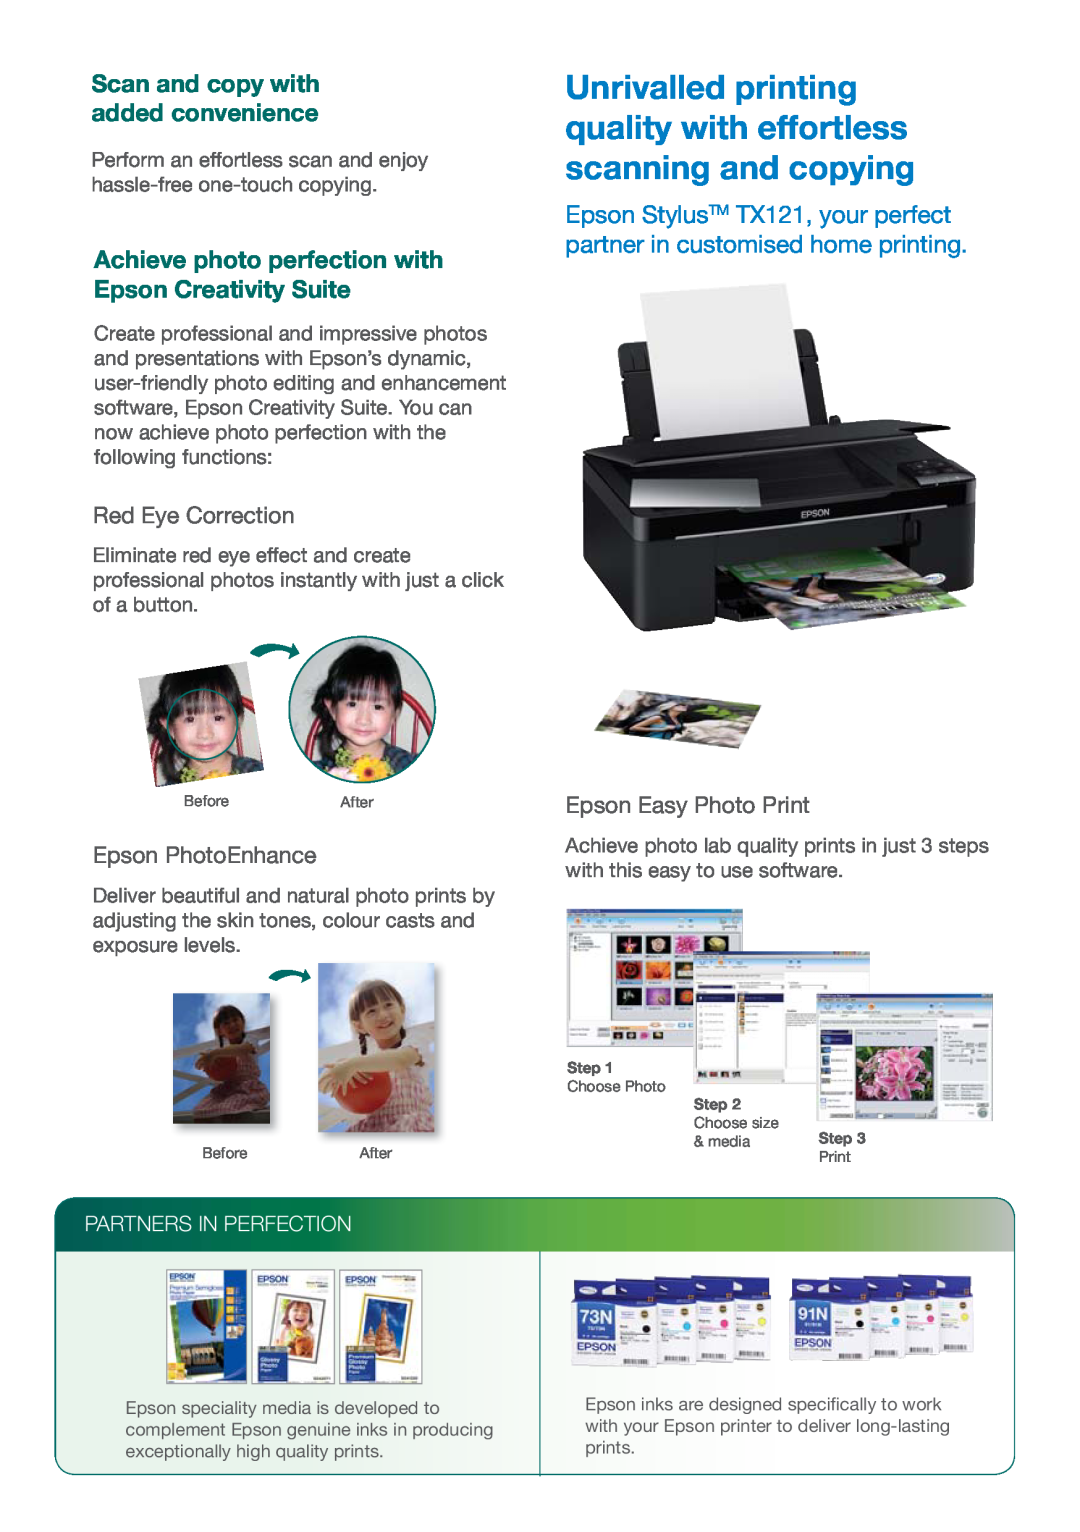 Epson TX121 manual Achieve photo perfection with Epson Creativity Suite, Partners In Perfection, Red Eye Correction 